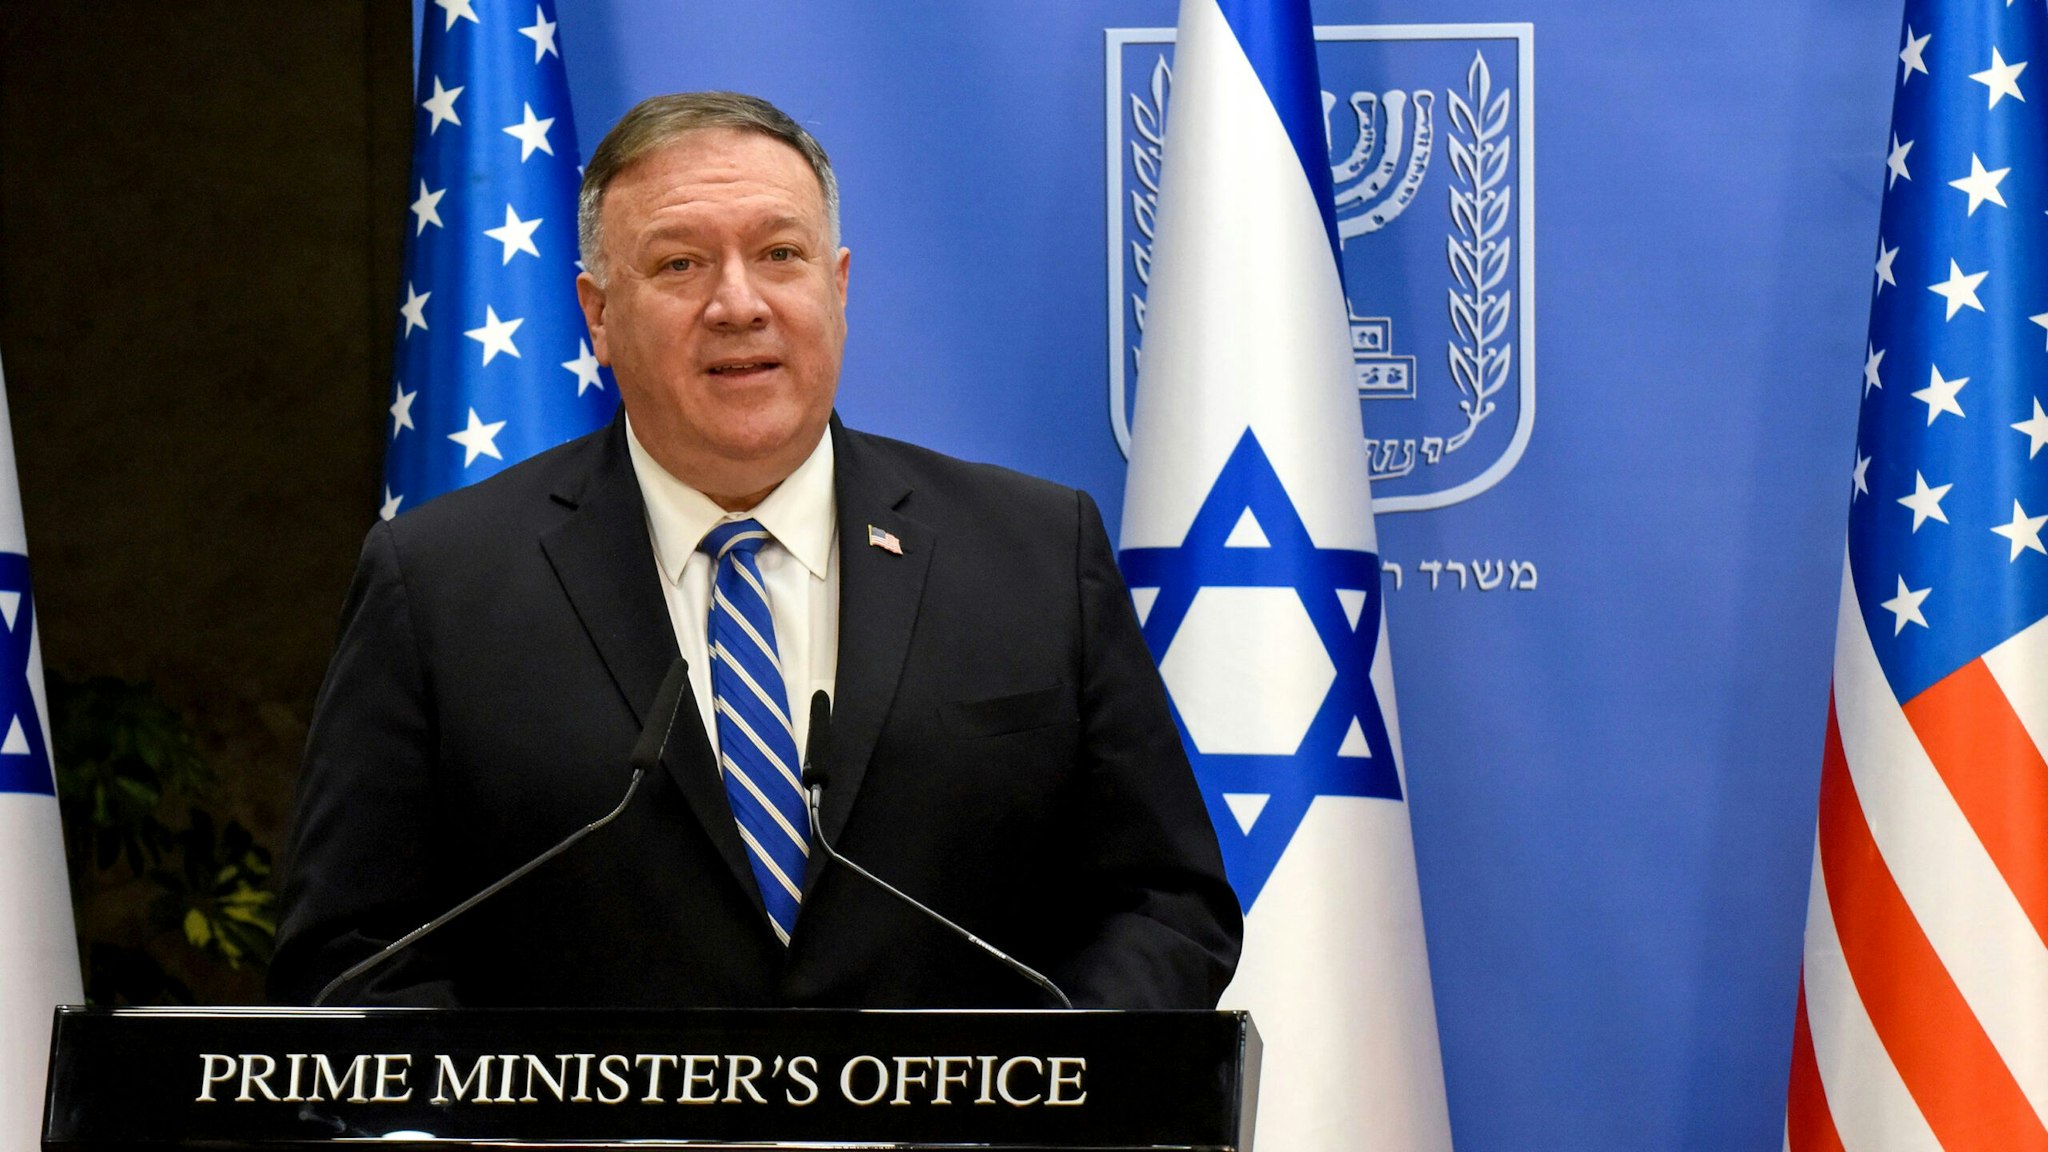 US Secretary of State Mike Pompeo speaks during a joint statement to the press with Israeli Prime Minister Benjamin Netanyahu (unseen) after meeting in Jerusalem, on August 24, 2020. - Pompeo arrived in Israel kicking off a five-day visit to the Middle East which will take him to Sudan, the United Arab Emirates, and Bahrain, focusing on Israel's normalising of ties with the UAE and pushing other Arab states to follow suit.